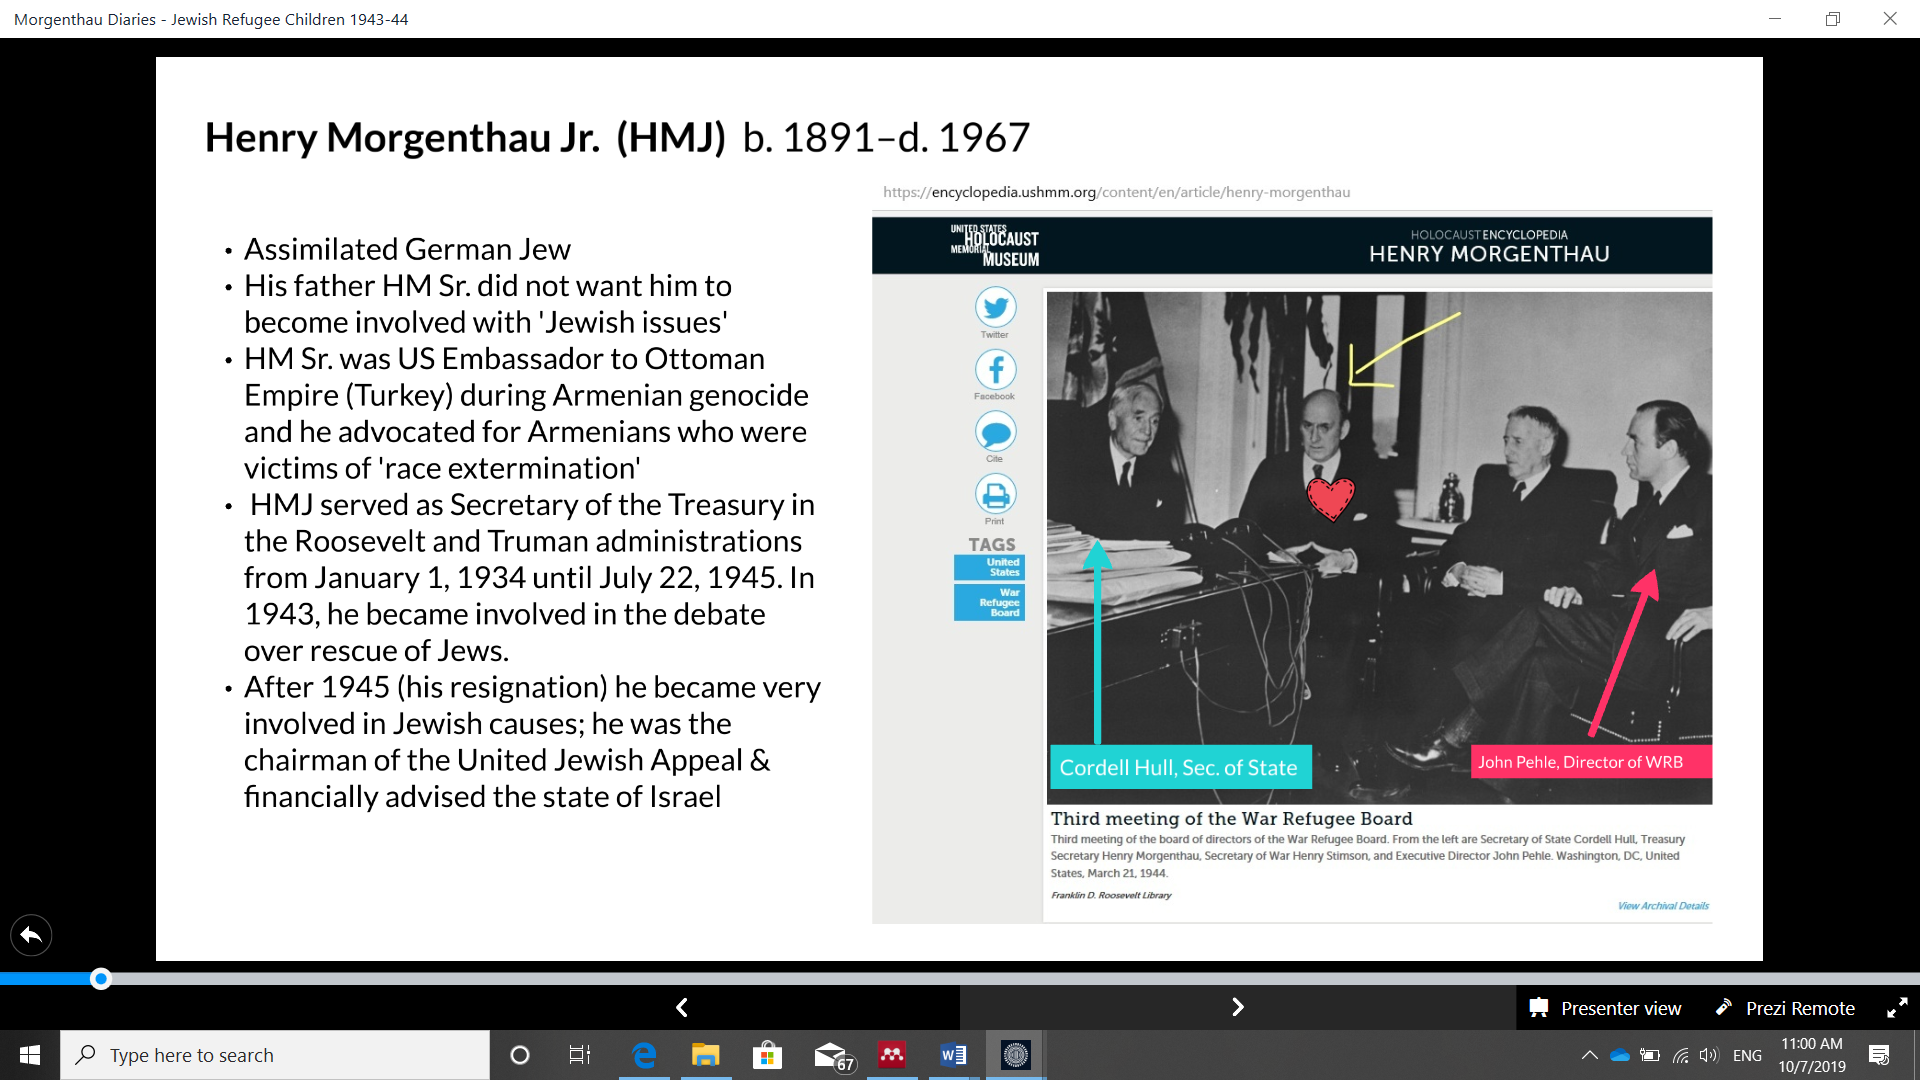 Slide 3 from EHRI presentation. Photograph of the Third Meeting of the War Refugee Board from USHMM, and brief historical biography of HMJ